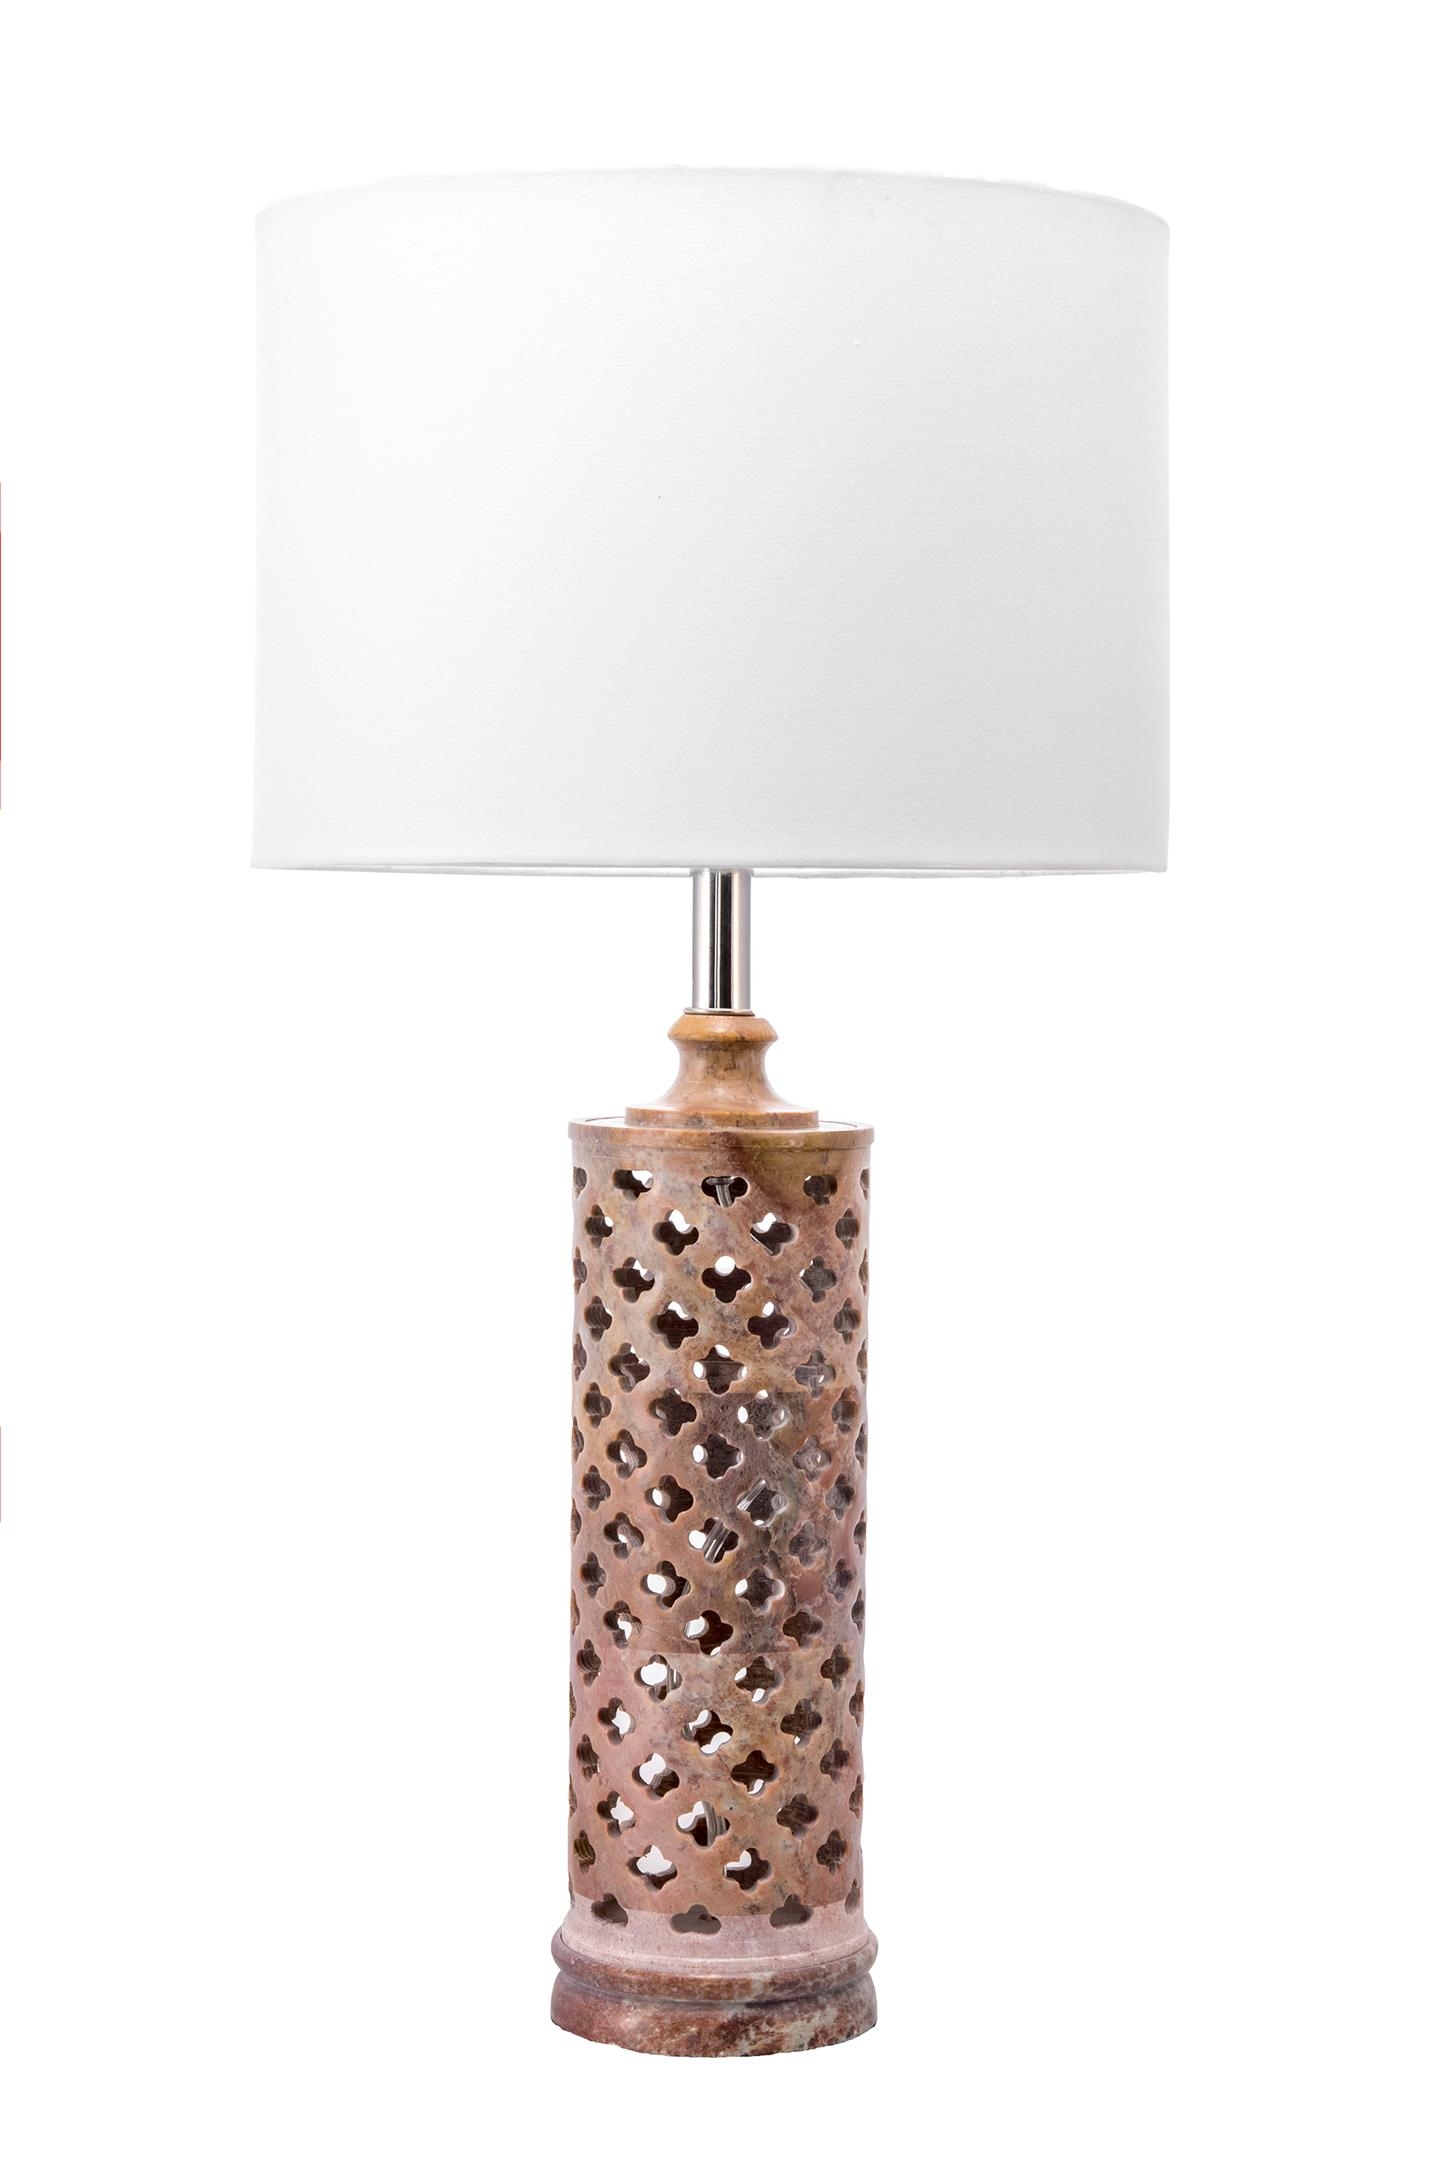  Roy 24" Marble Table Lamp - Image 2